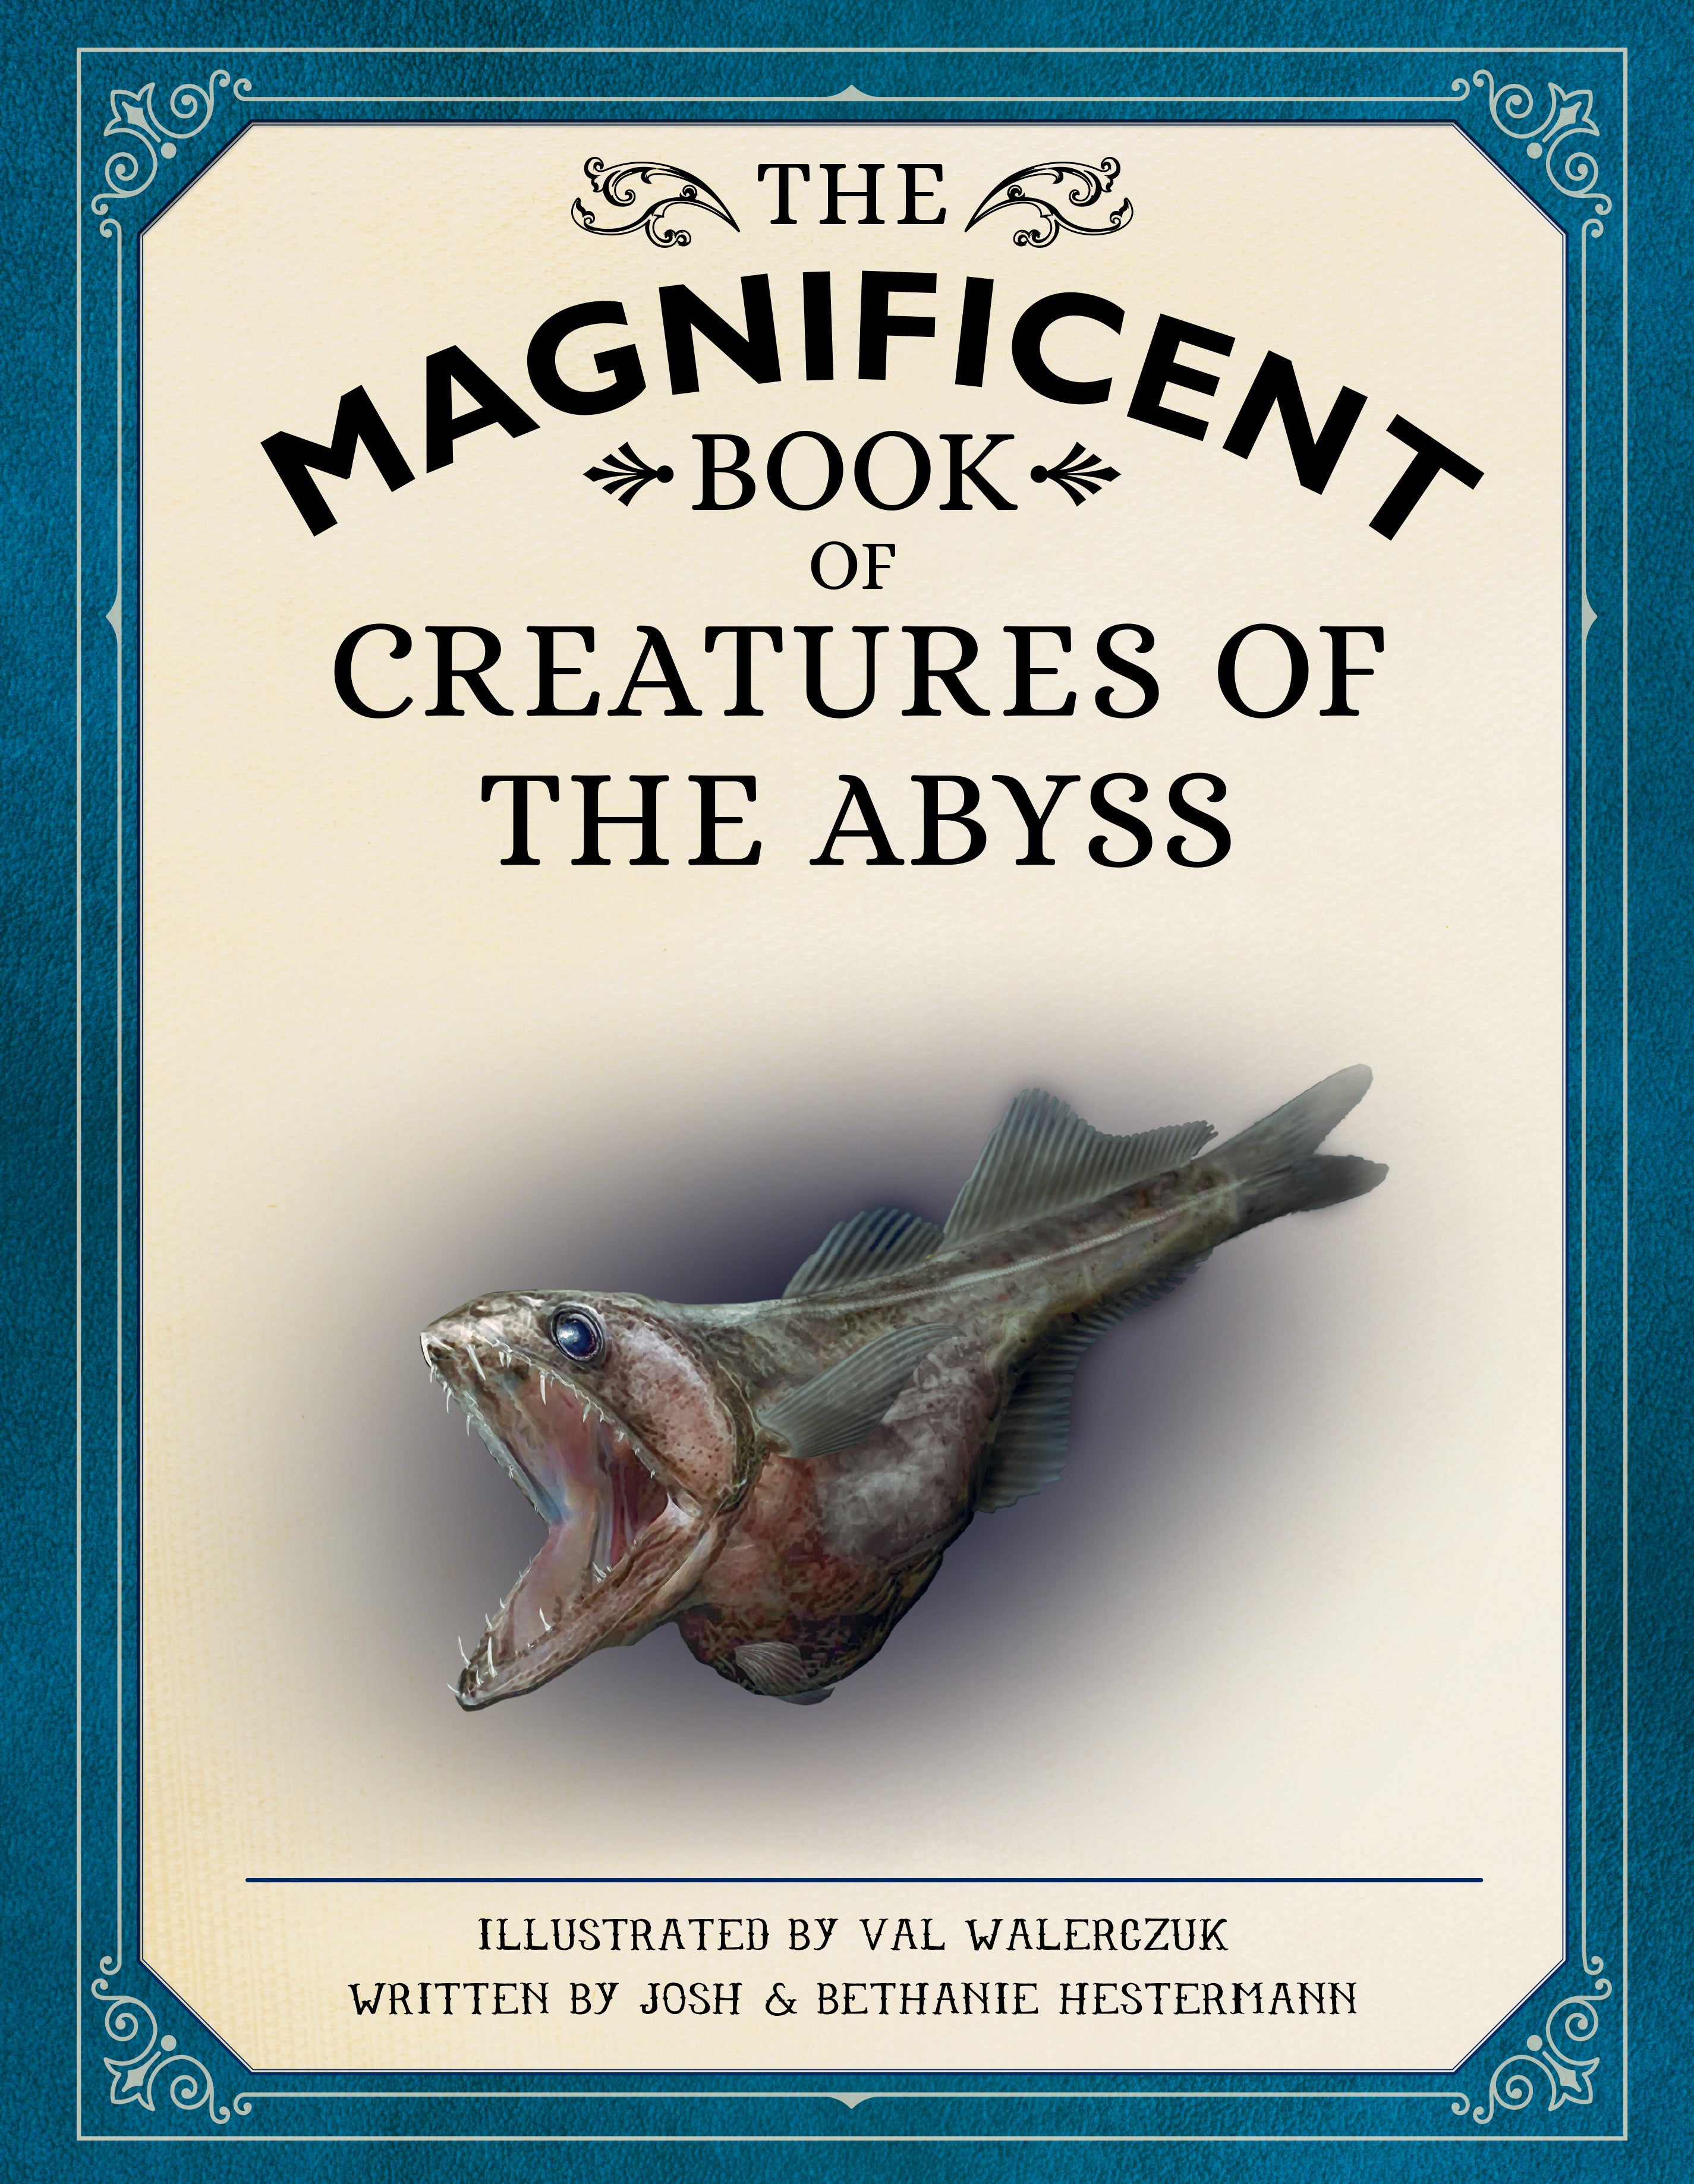 deep sea creatures abyss